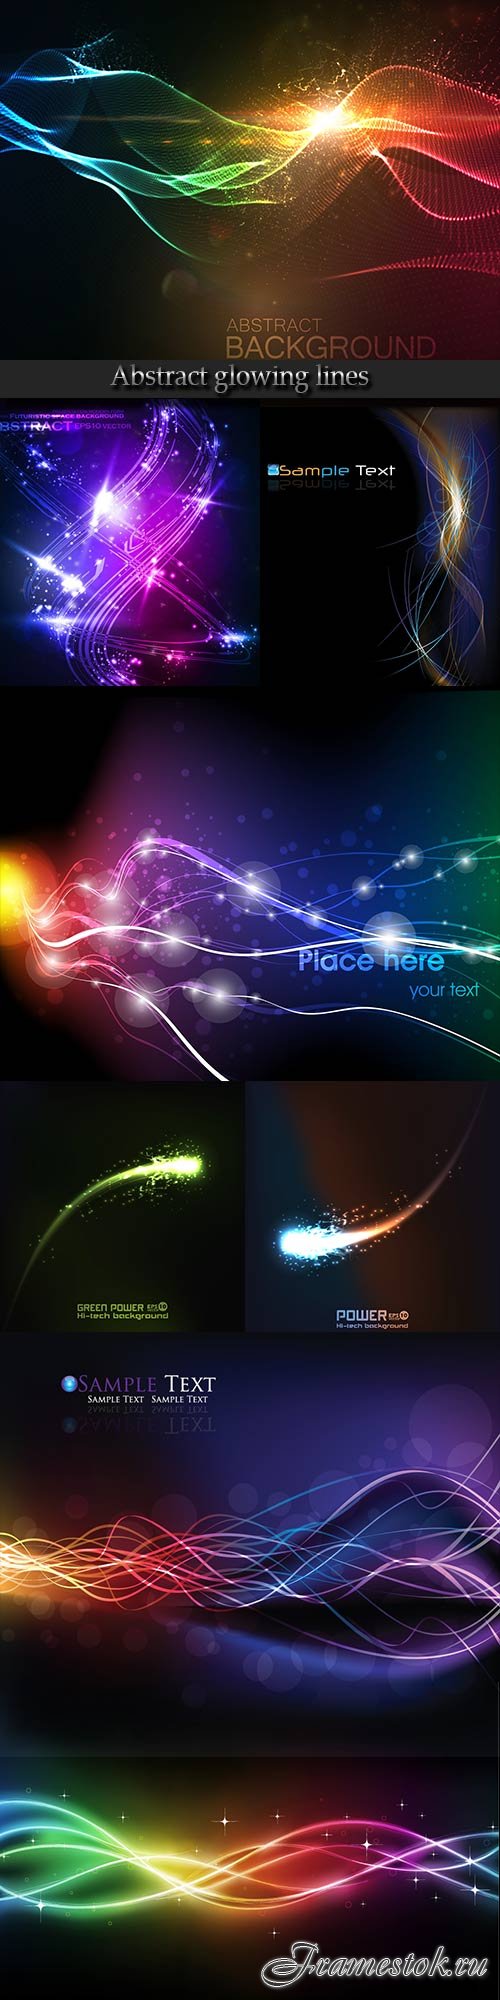 Abstract glowing lines on a dark background